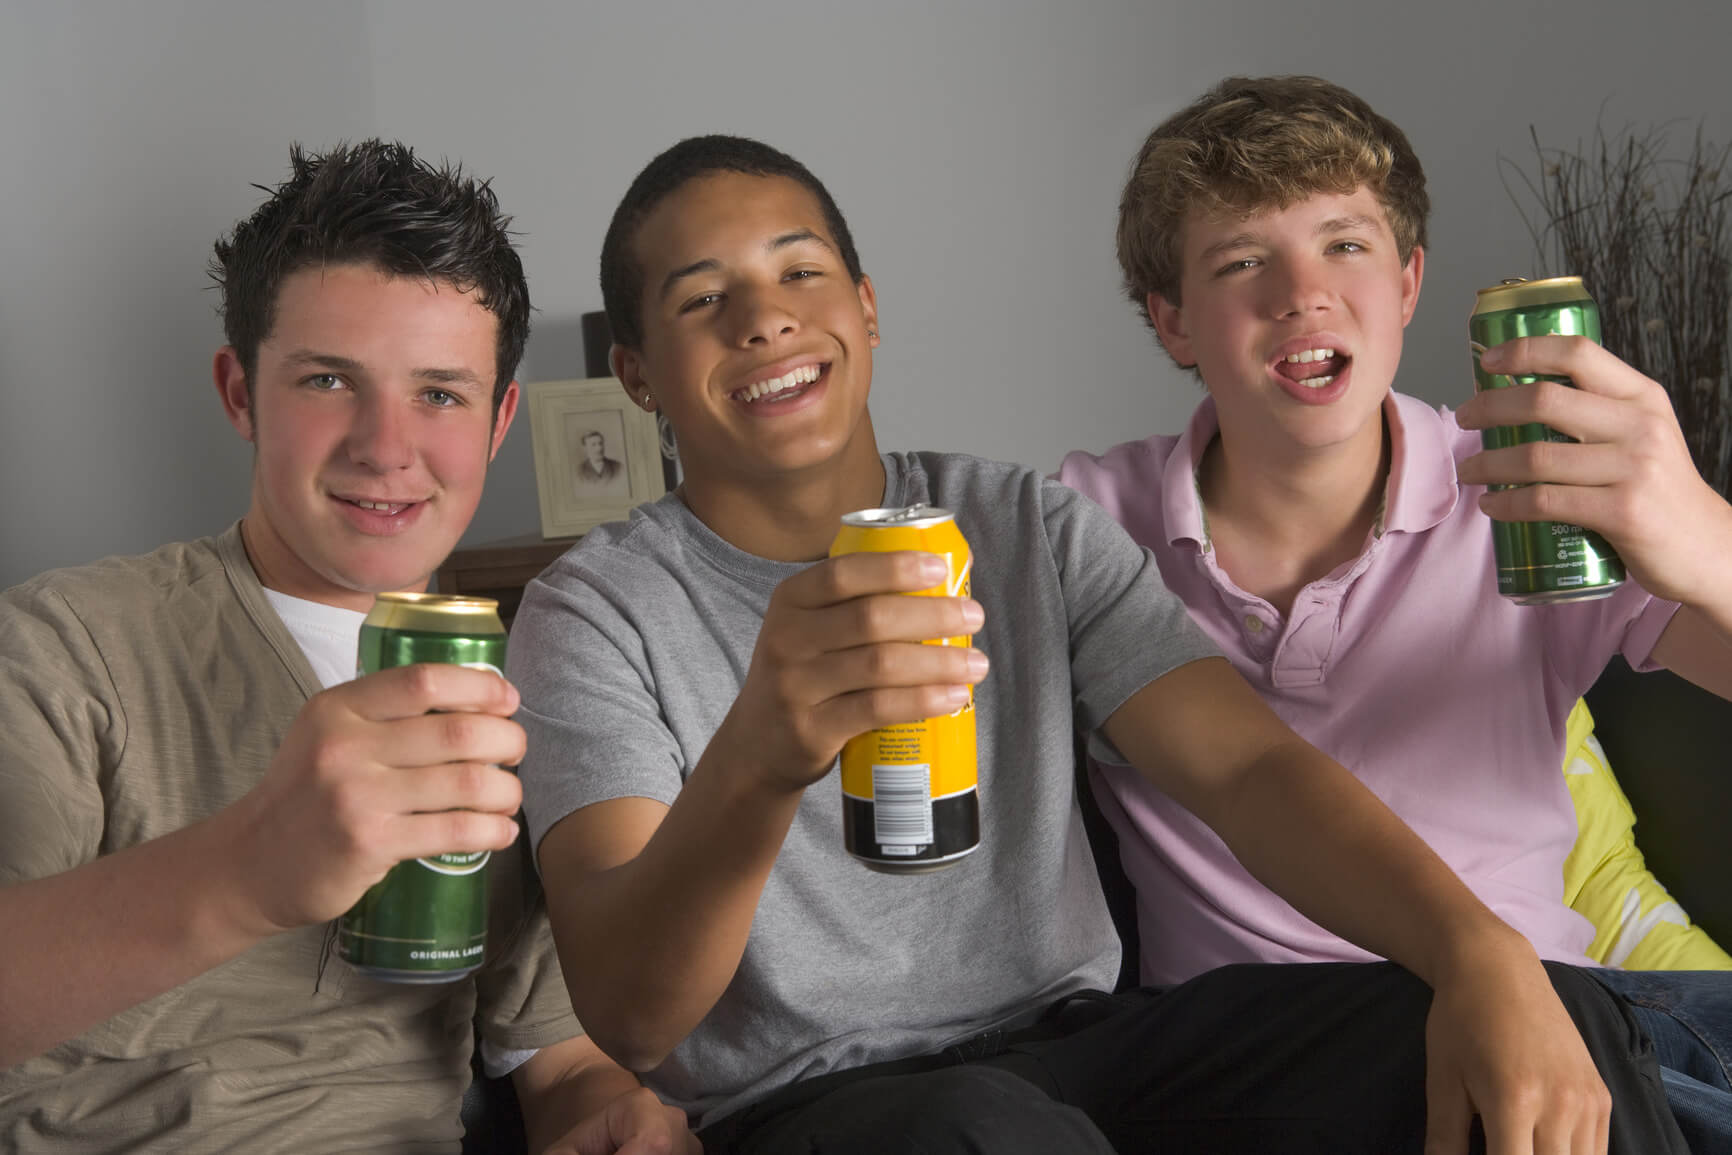 Would You Let Your Teens And Friends Drink In Your Home?